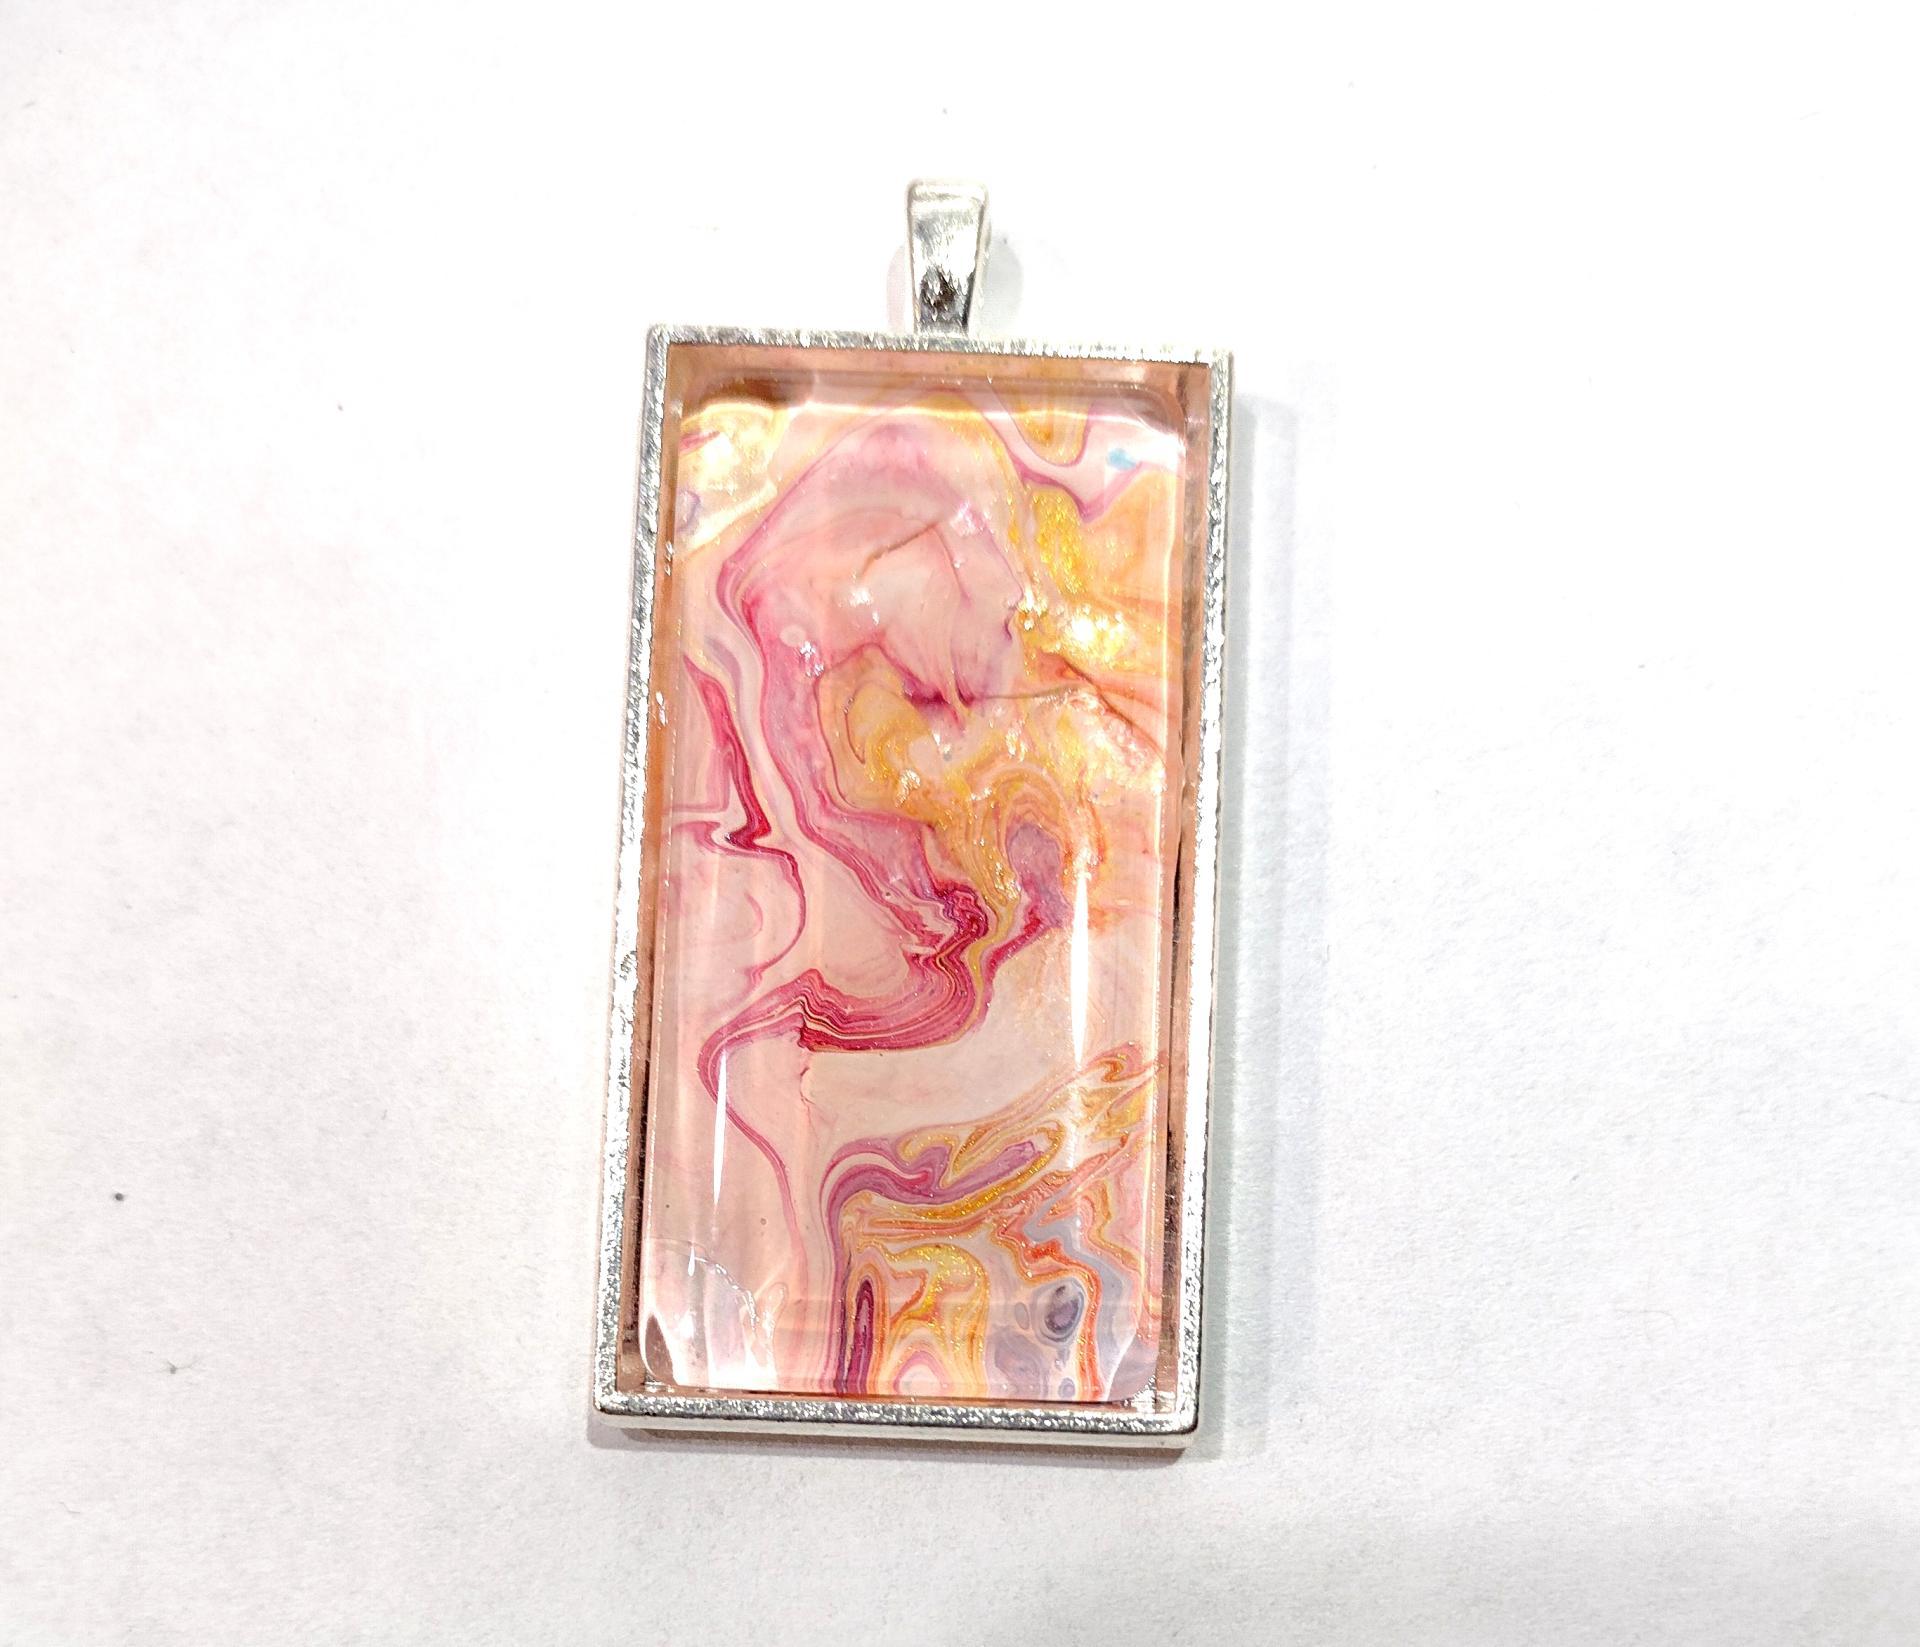 Painted Pendant, Gold and Pink Swirls